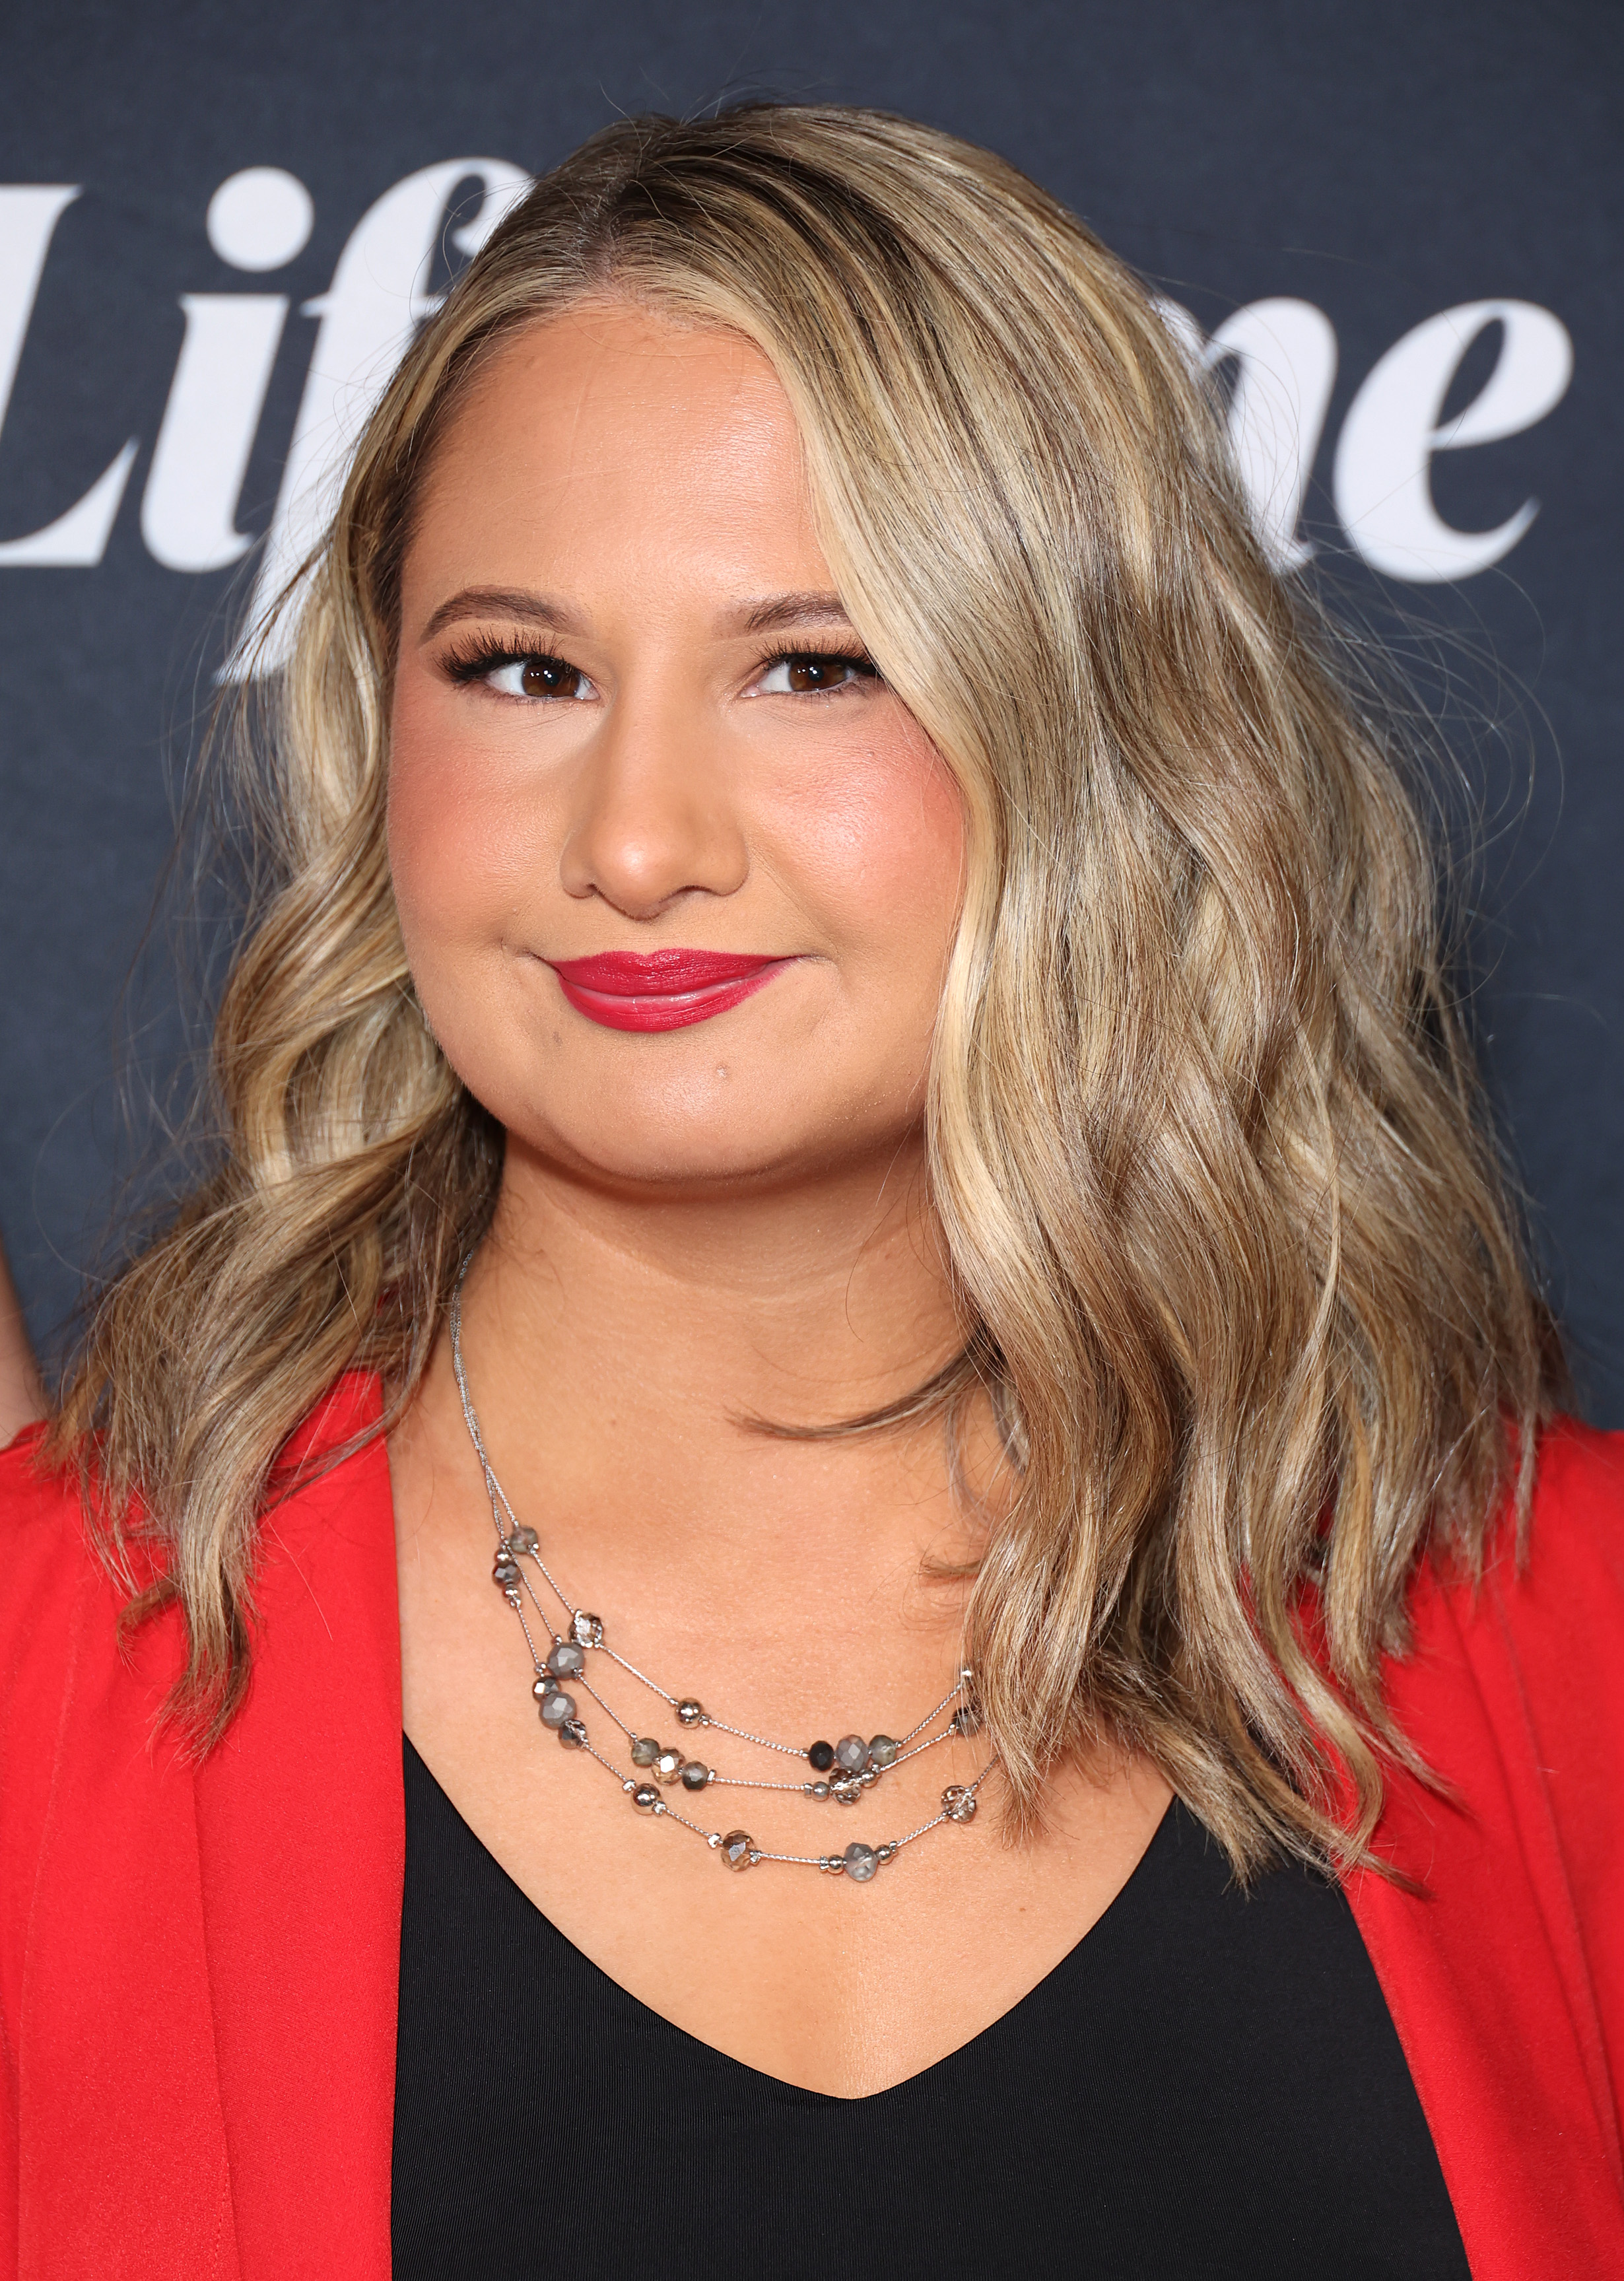 Gypsy Rose Blanchard arrives at the "An Evening with Lifetime: Conversations on Controversies" FYC event at The Grove on May 1, 2024, in Los Angeles, California. | Source: Getty Images